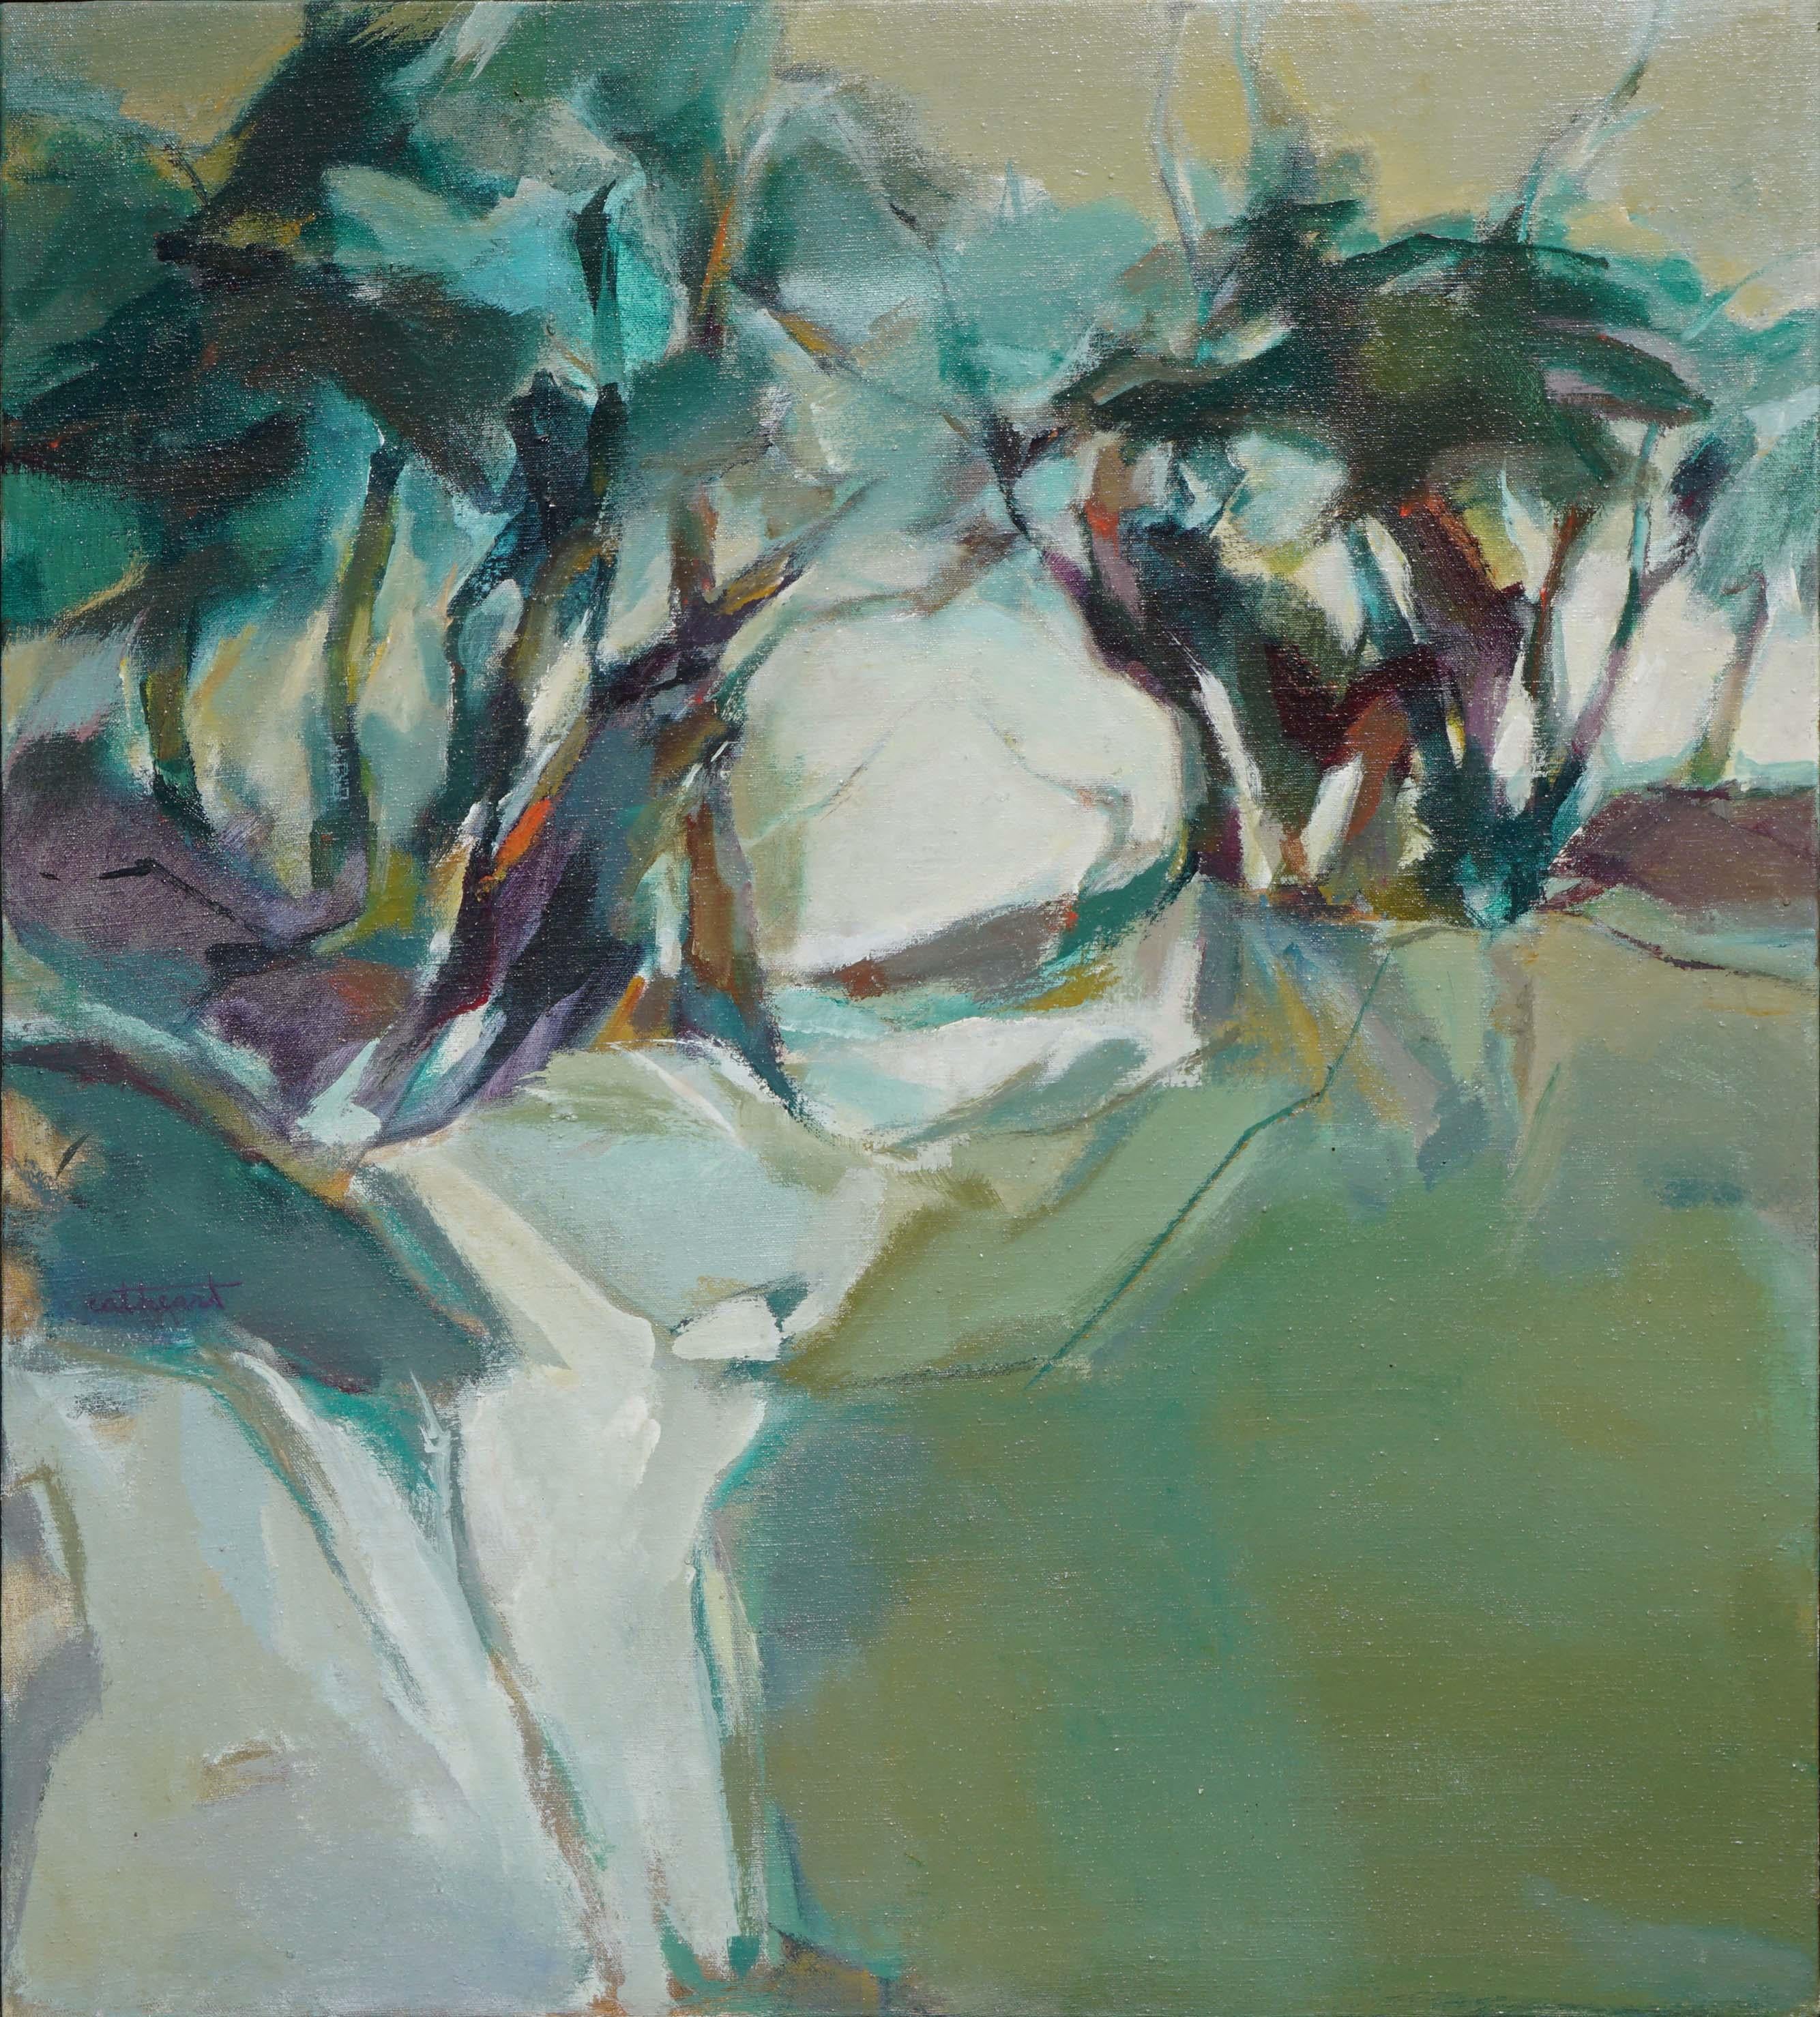 Abstract Treescape Landscape Berkeley School Abstract Expressionist  - Painting by Marjorie Cathcart